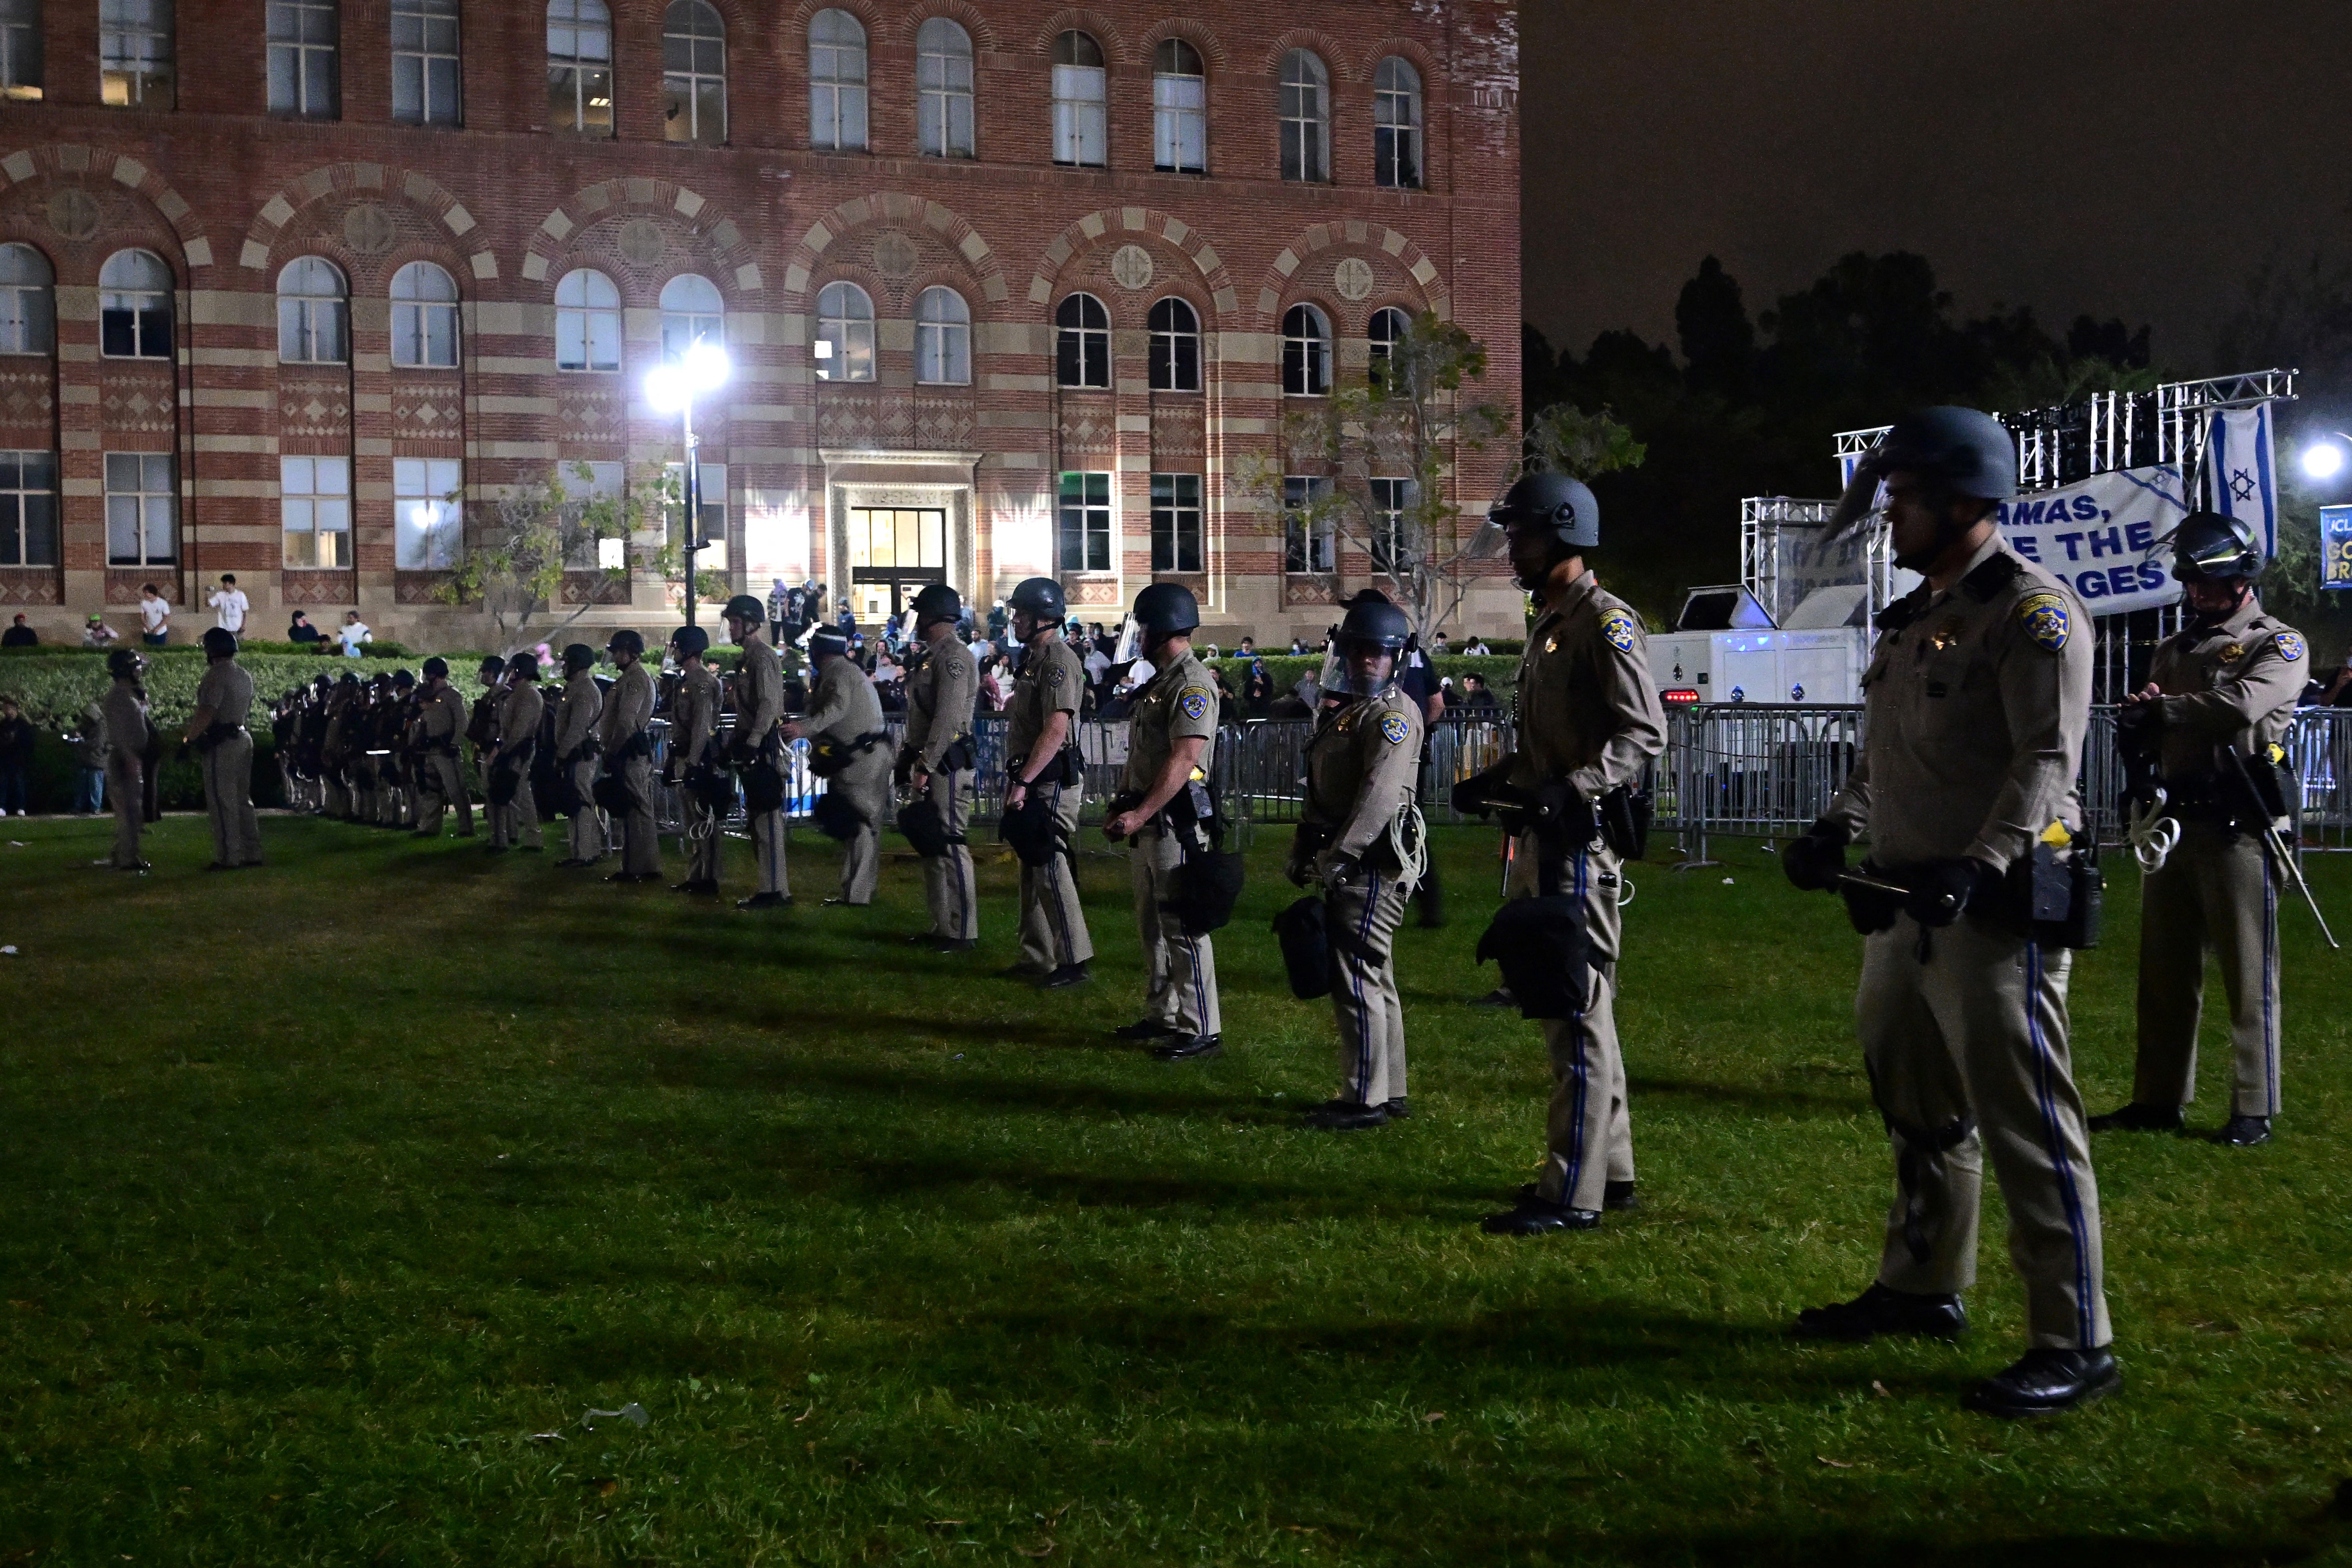 US Police officers stand guard after clashes errupted on the campus of the University of California Los Angeles (UCLA)